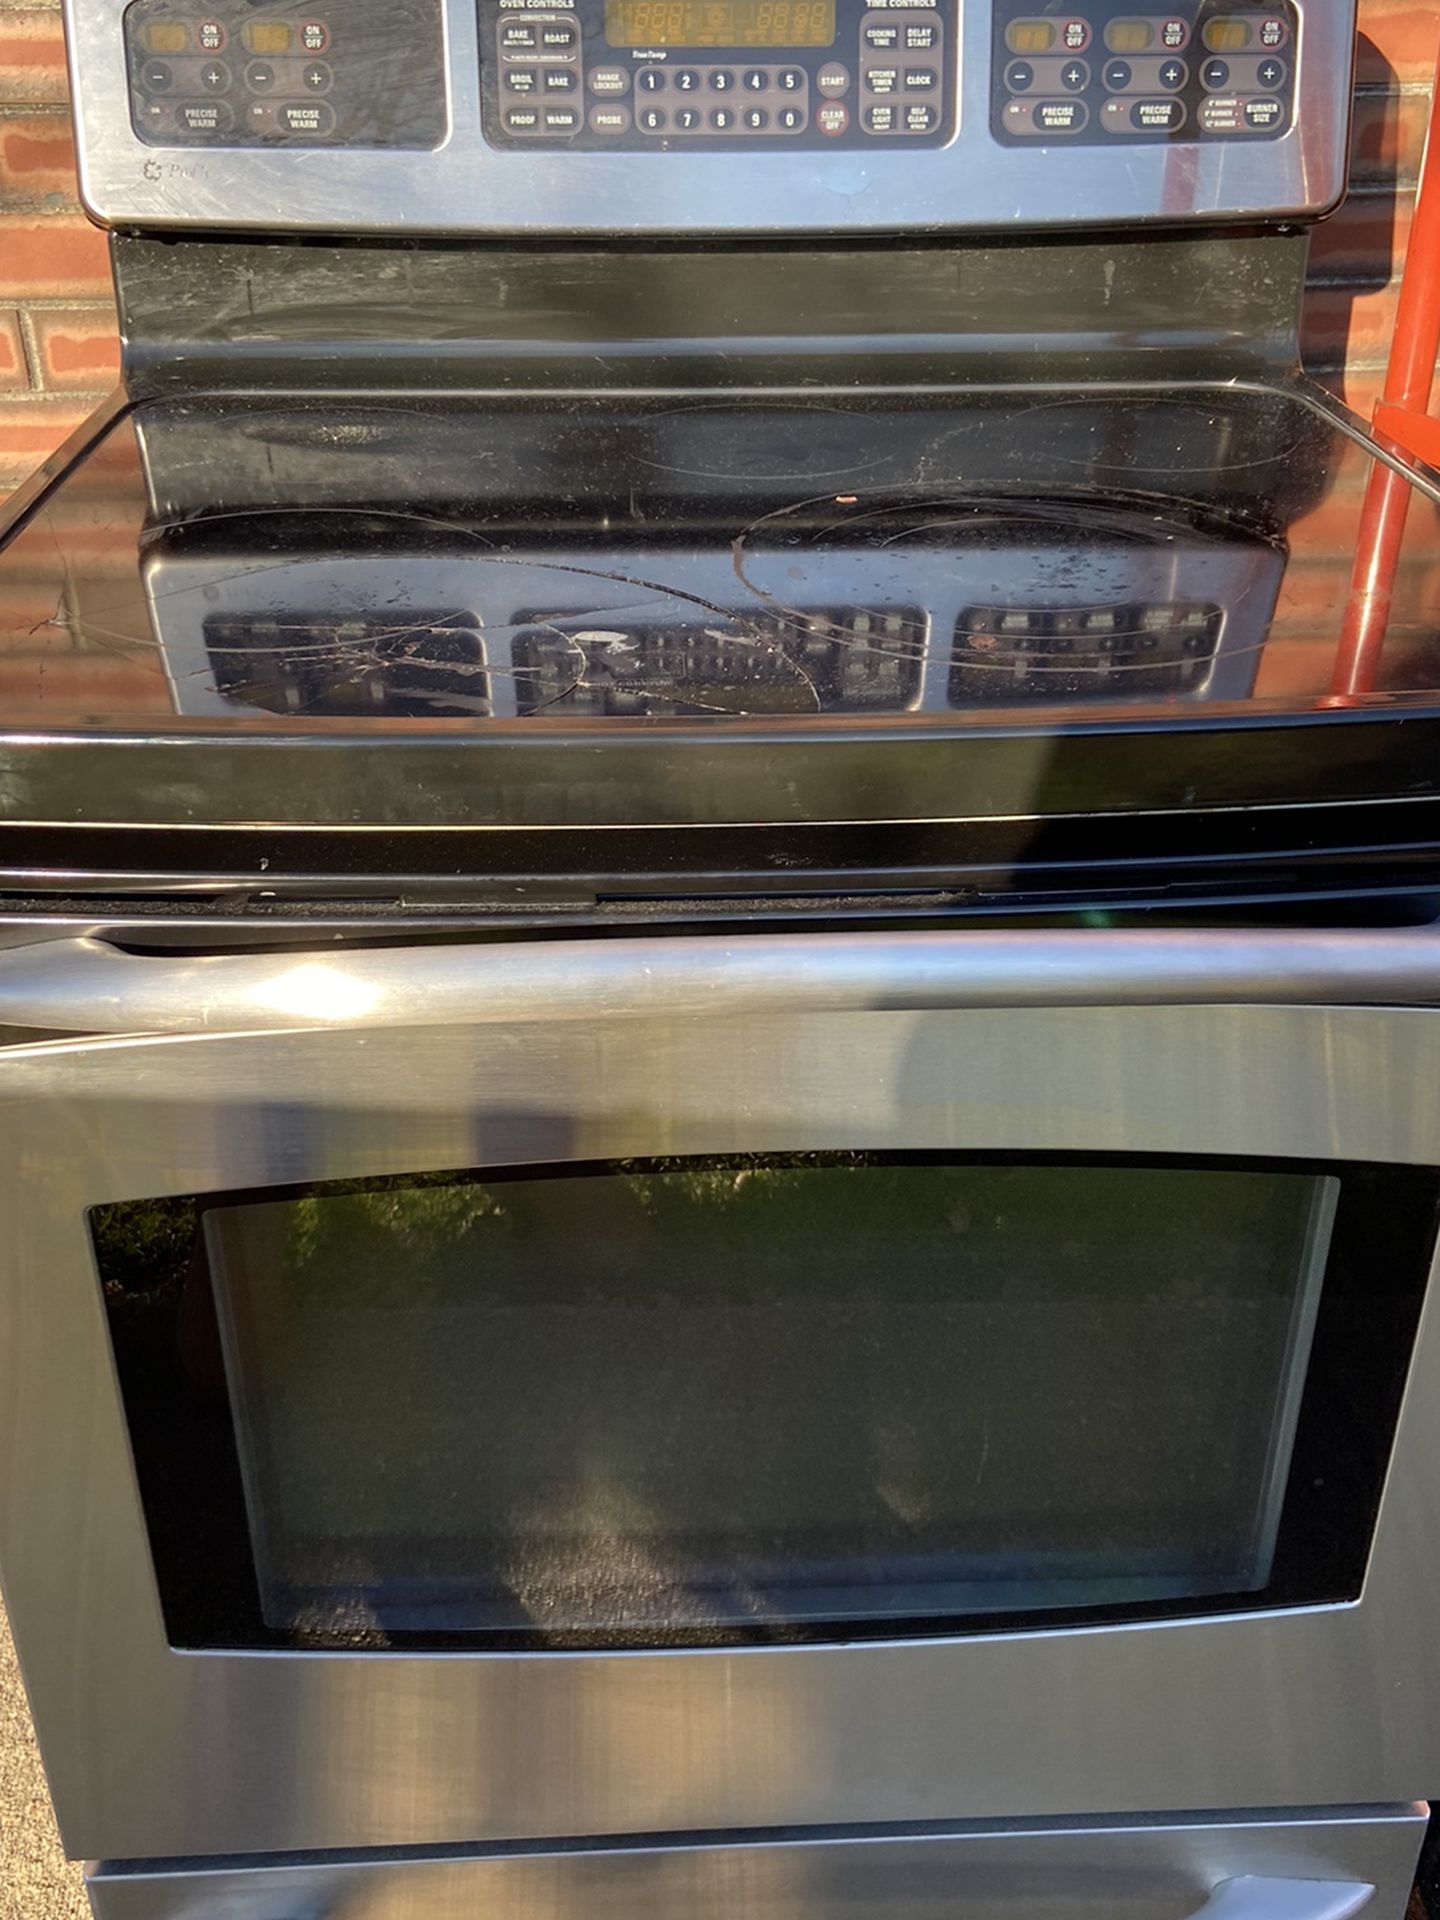 GE electric convection range. Roughly 10 years old. Still works great. Front left burner glass top is cracked. Burner still works